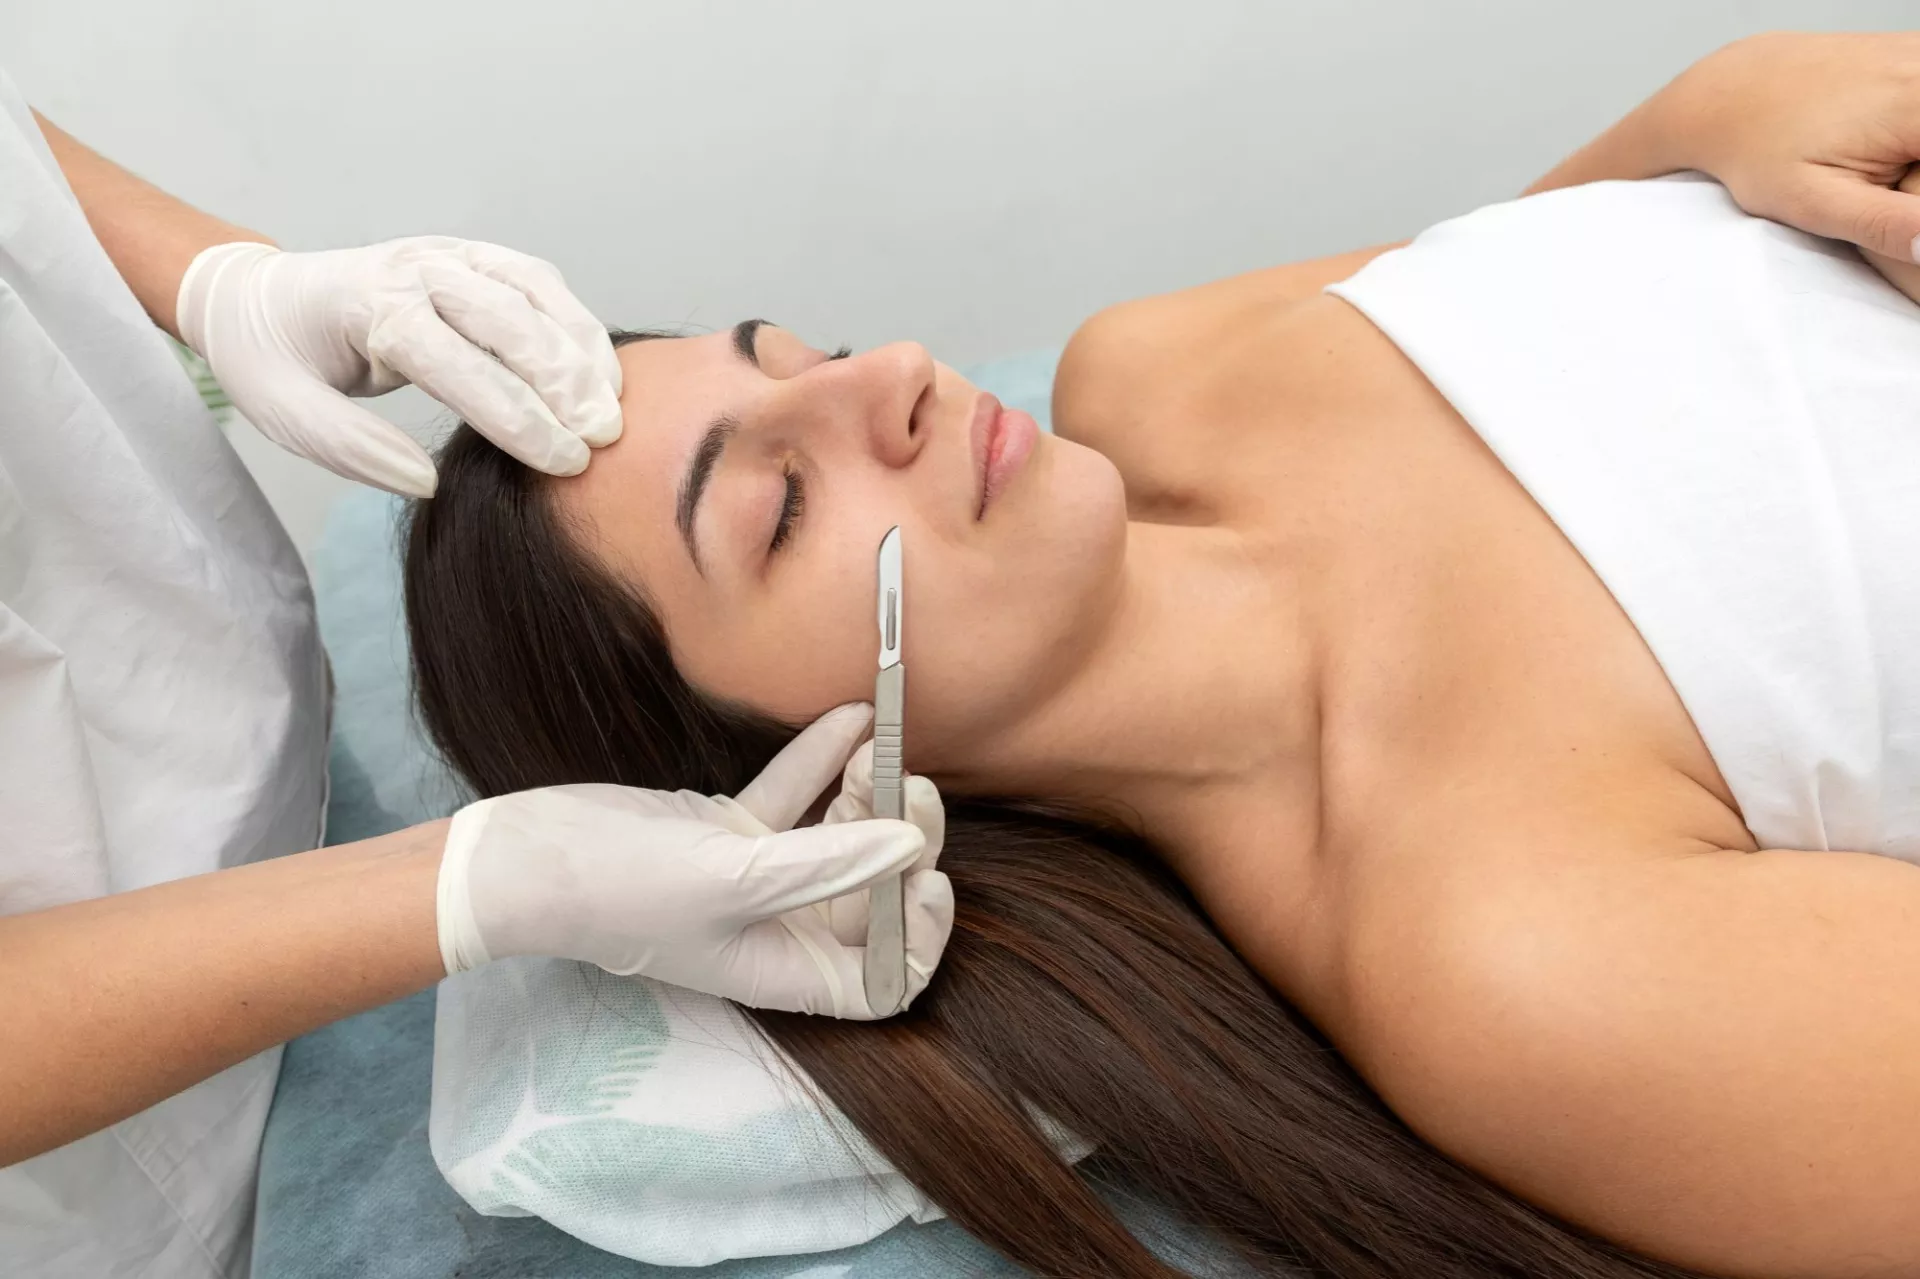 Dermaplaning: The current trend for radiant skin